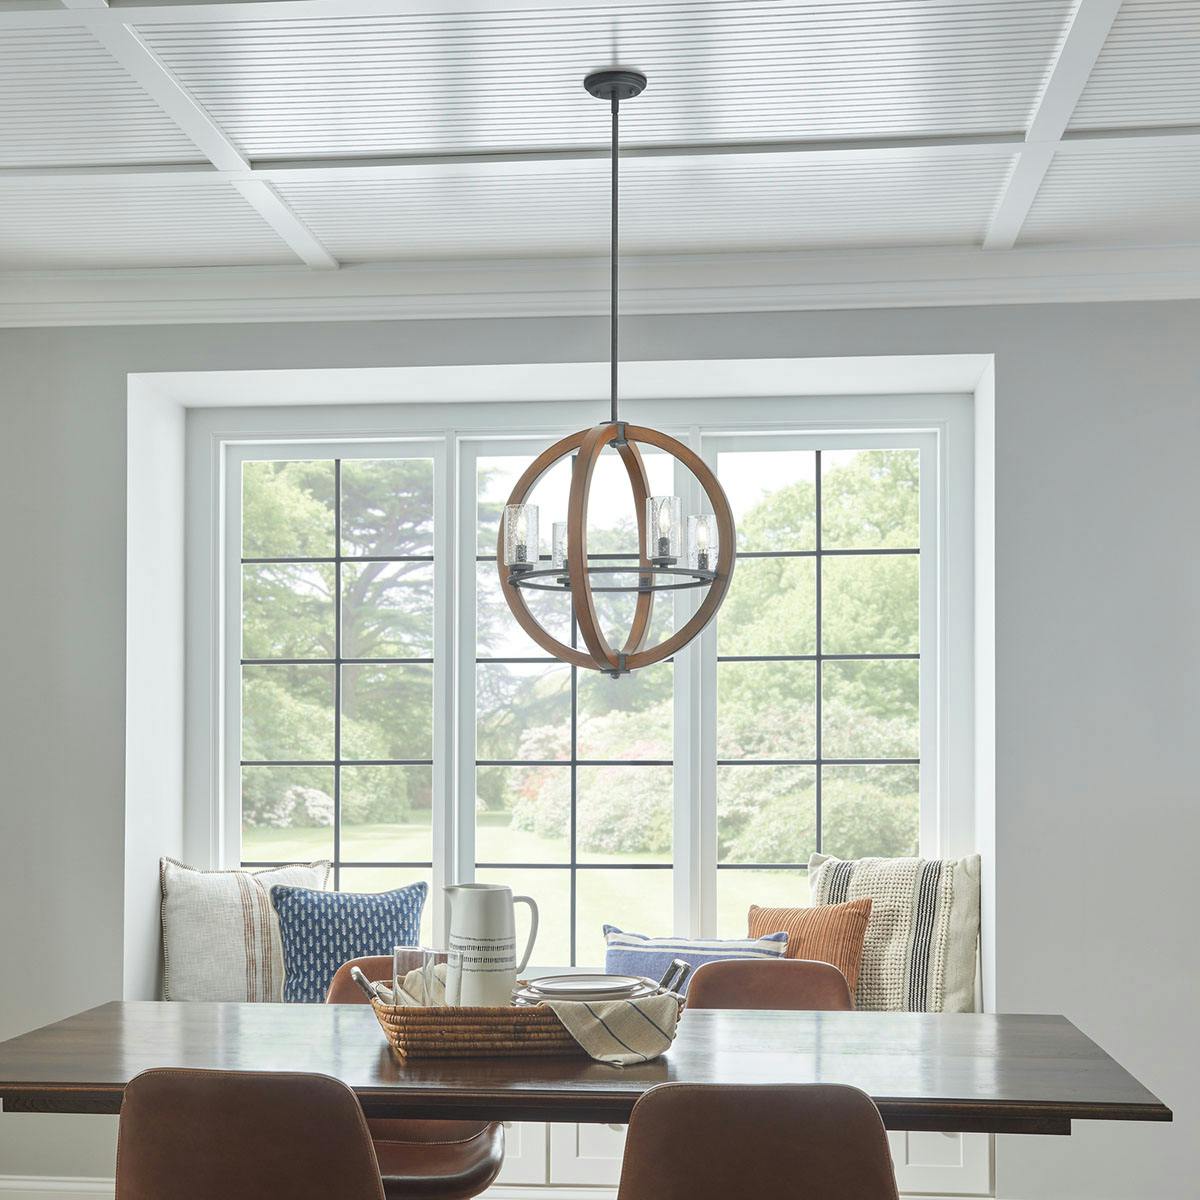 Day time dining room image featuring GrandBank chandelier 43185AUB